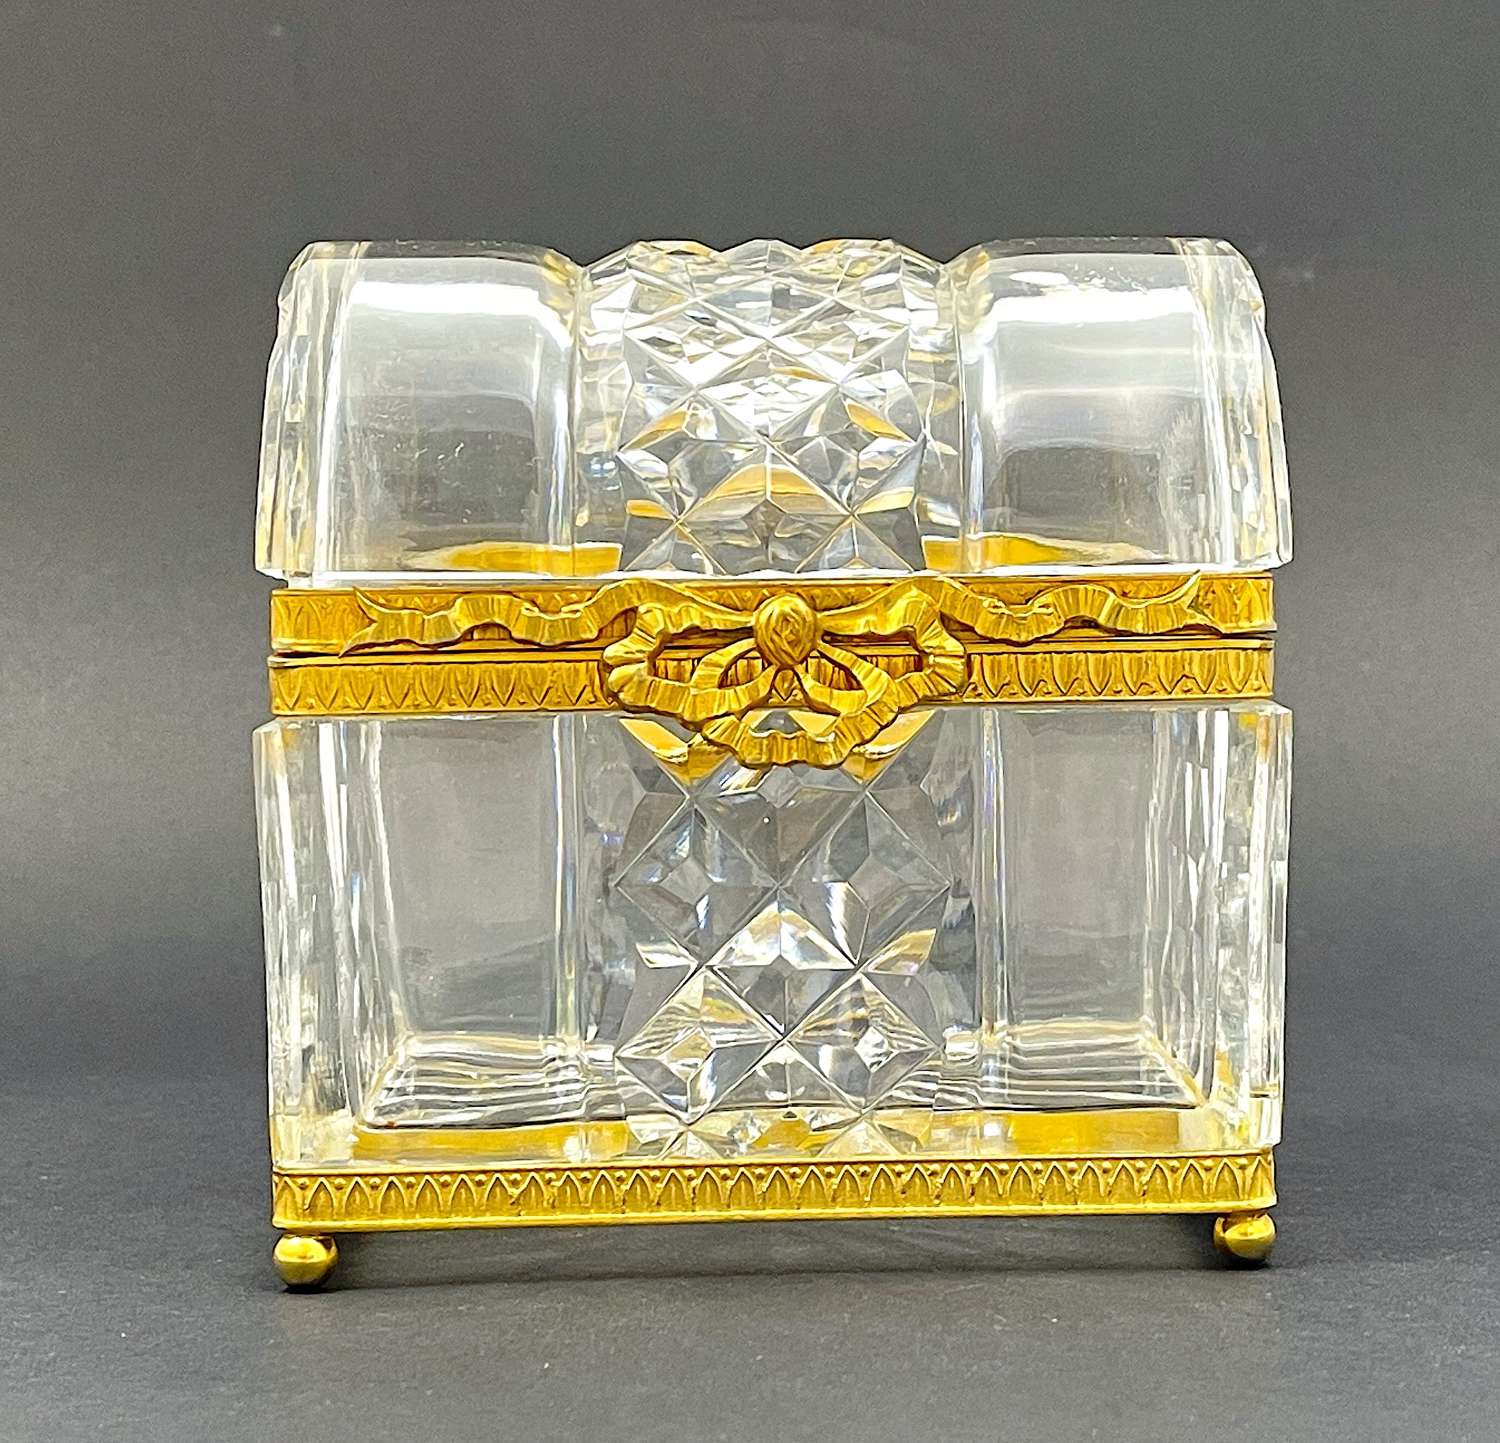 Antique Baccarat Rectangular Cut Crystal Casket with Bow Clasp